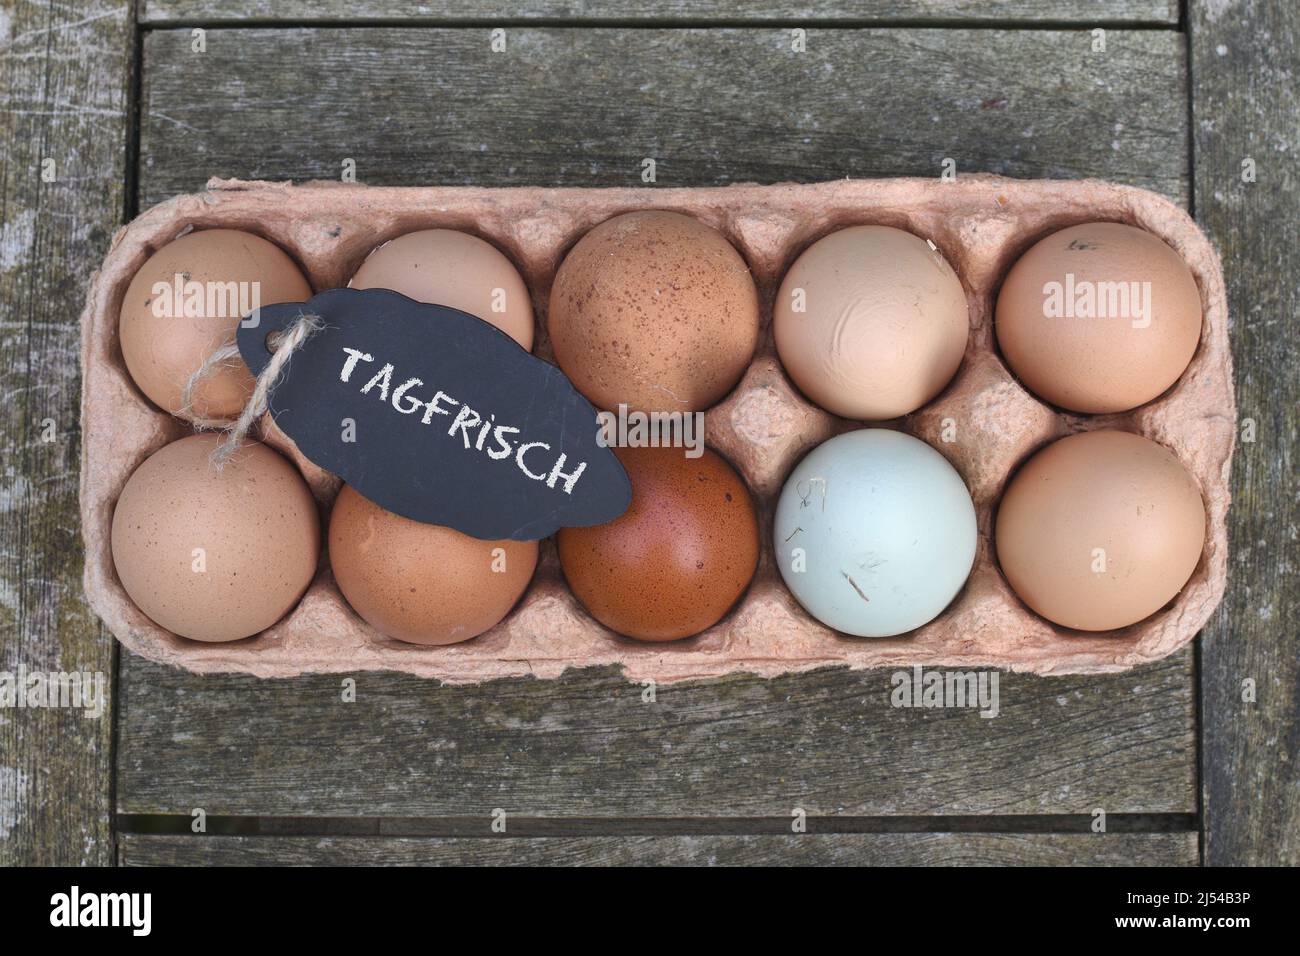 Big Pile Of Organic Free Range Chicken Eggs Stock Photo, Picture and  Royalty Free Image. Image 24959131.